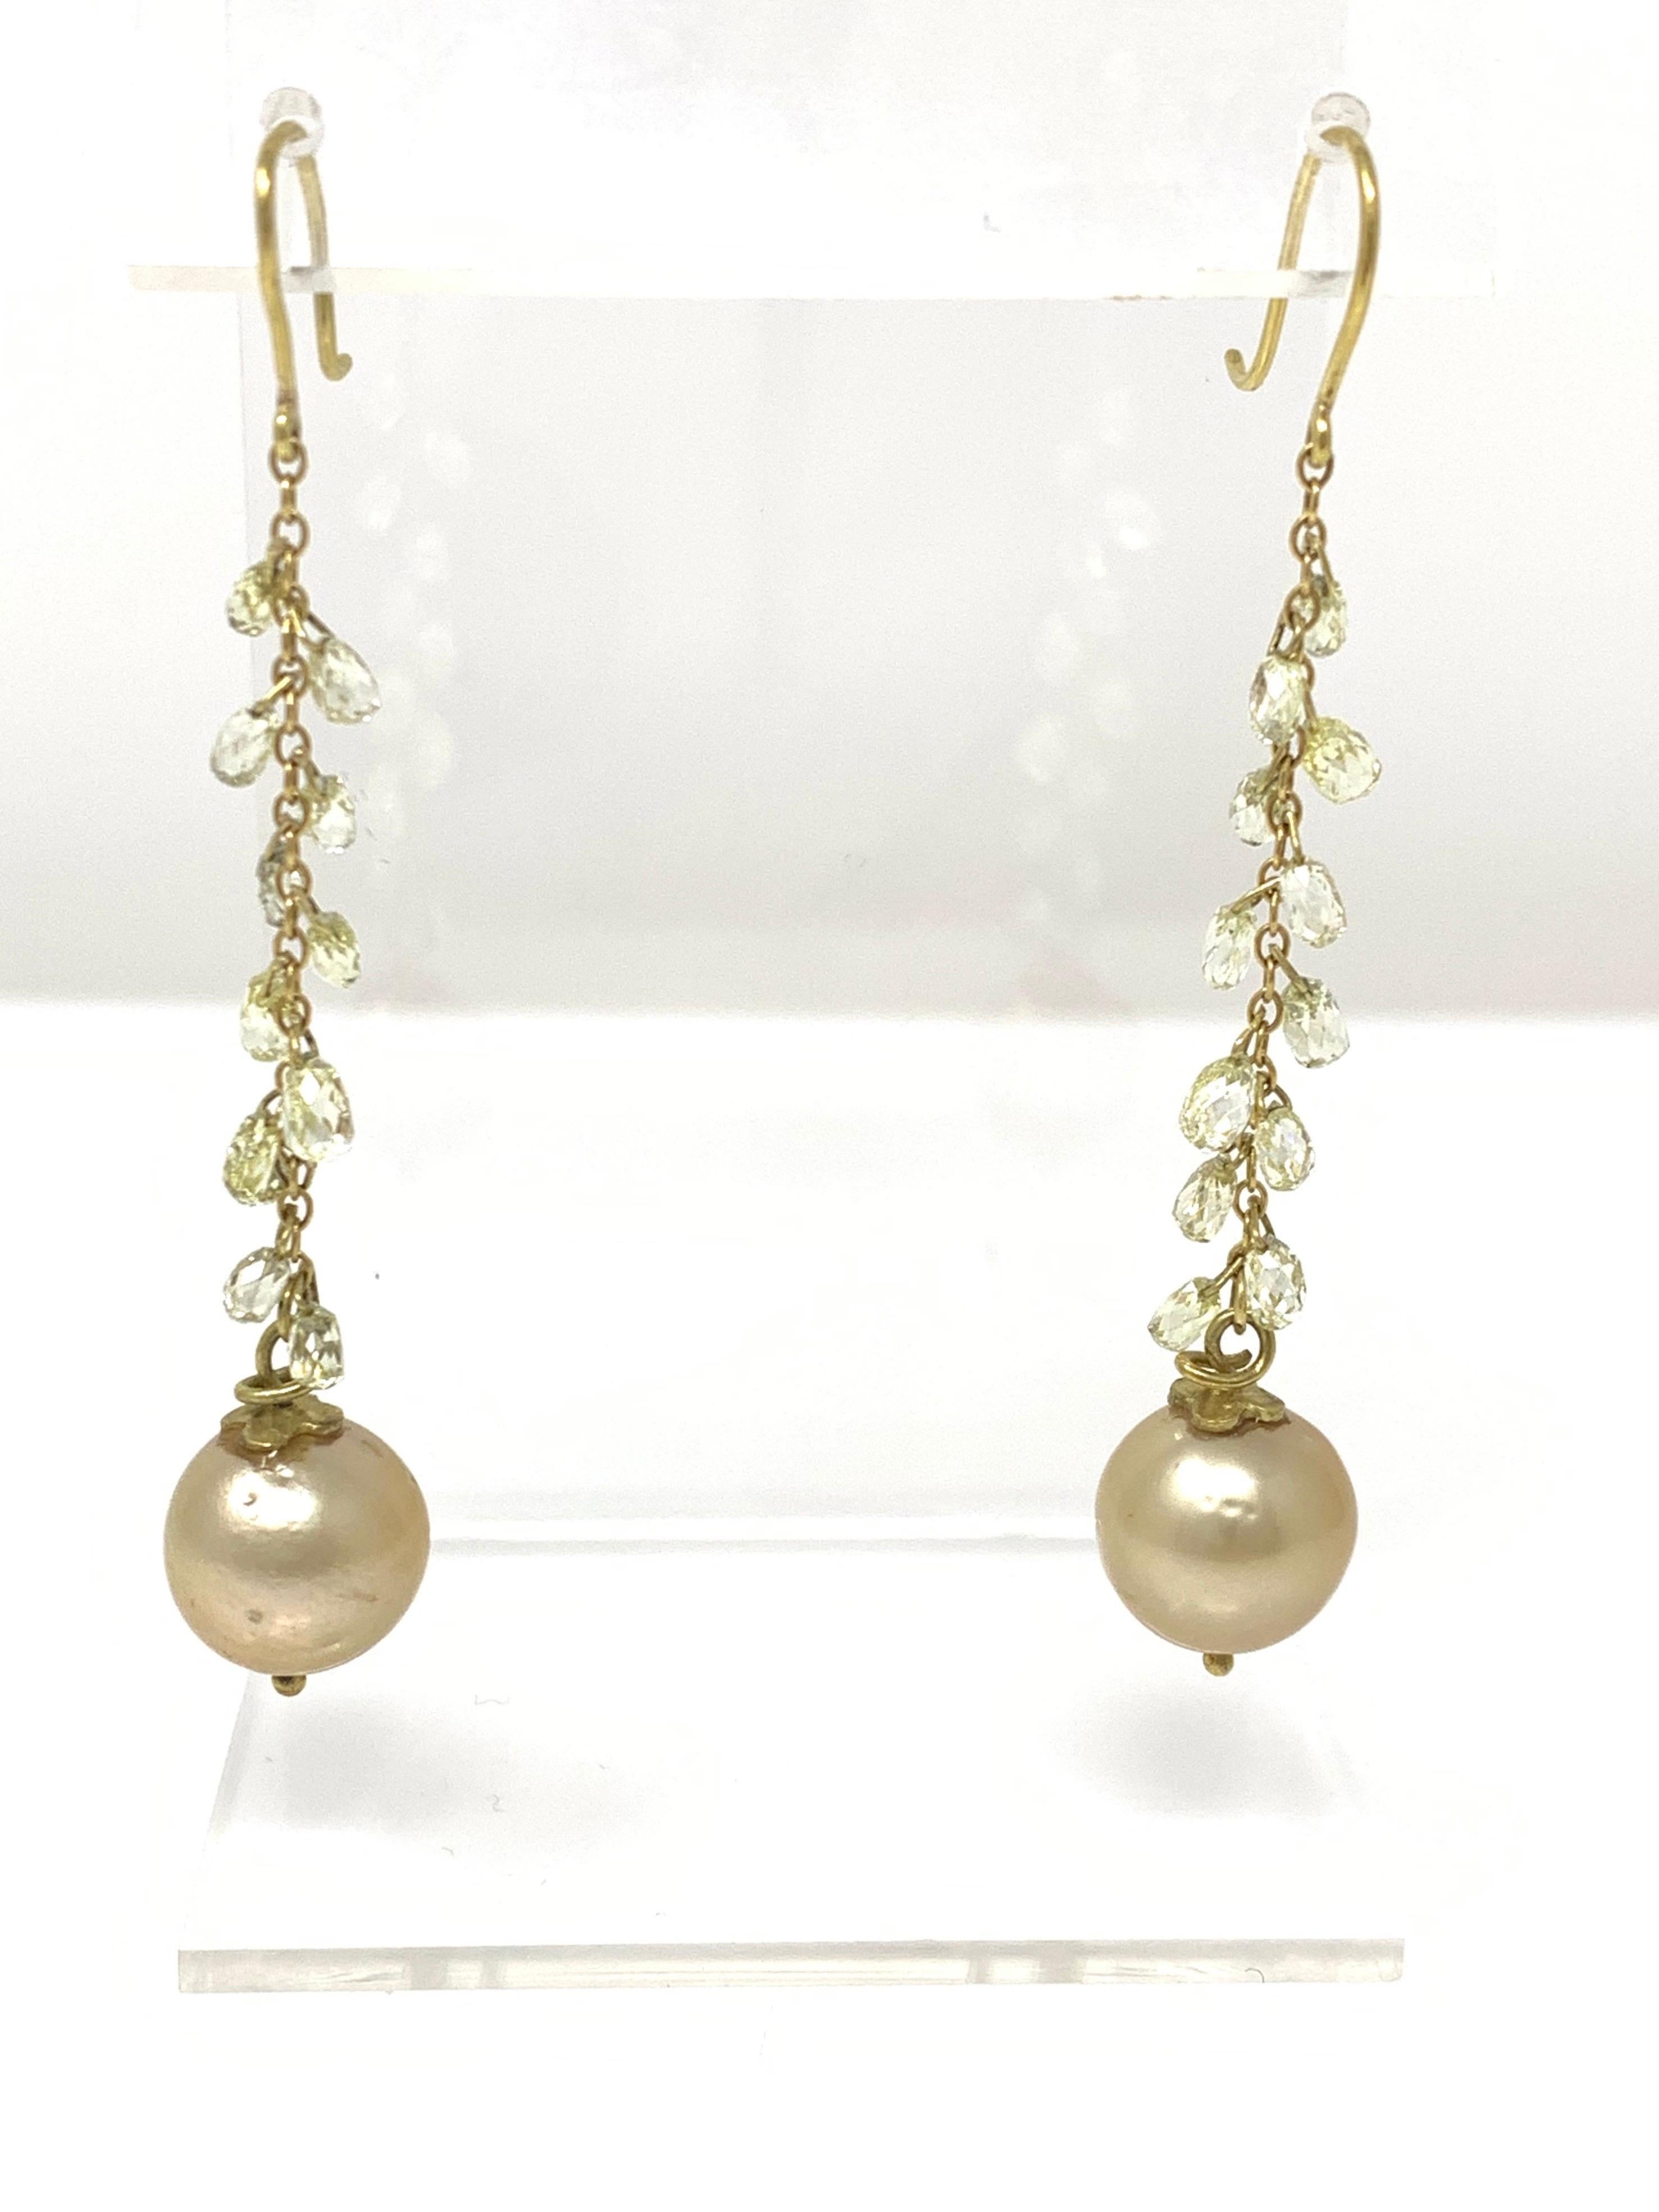 Women's Natural Yellow Briolette Diamond and South Sea Pearl Earrings in 18 Karat Gold